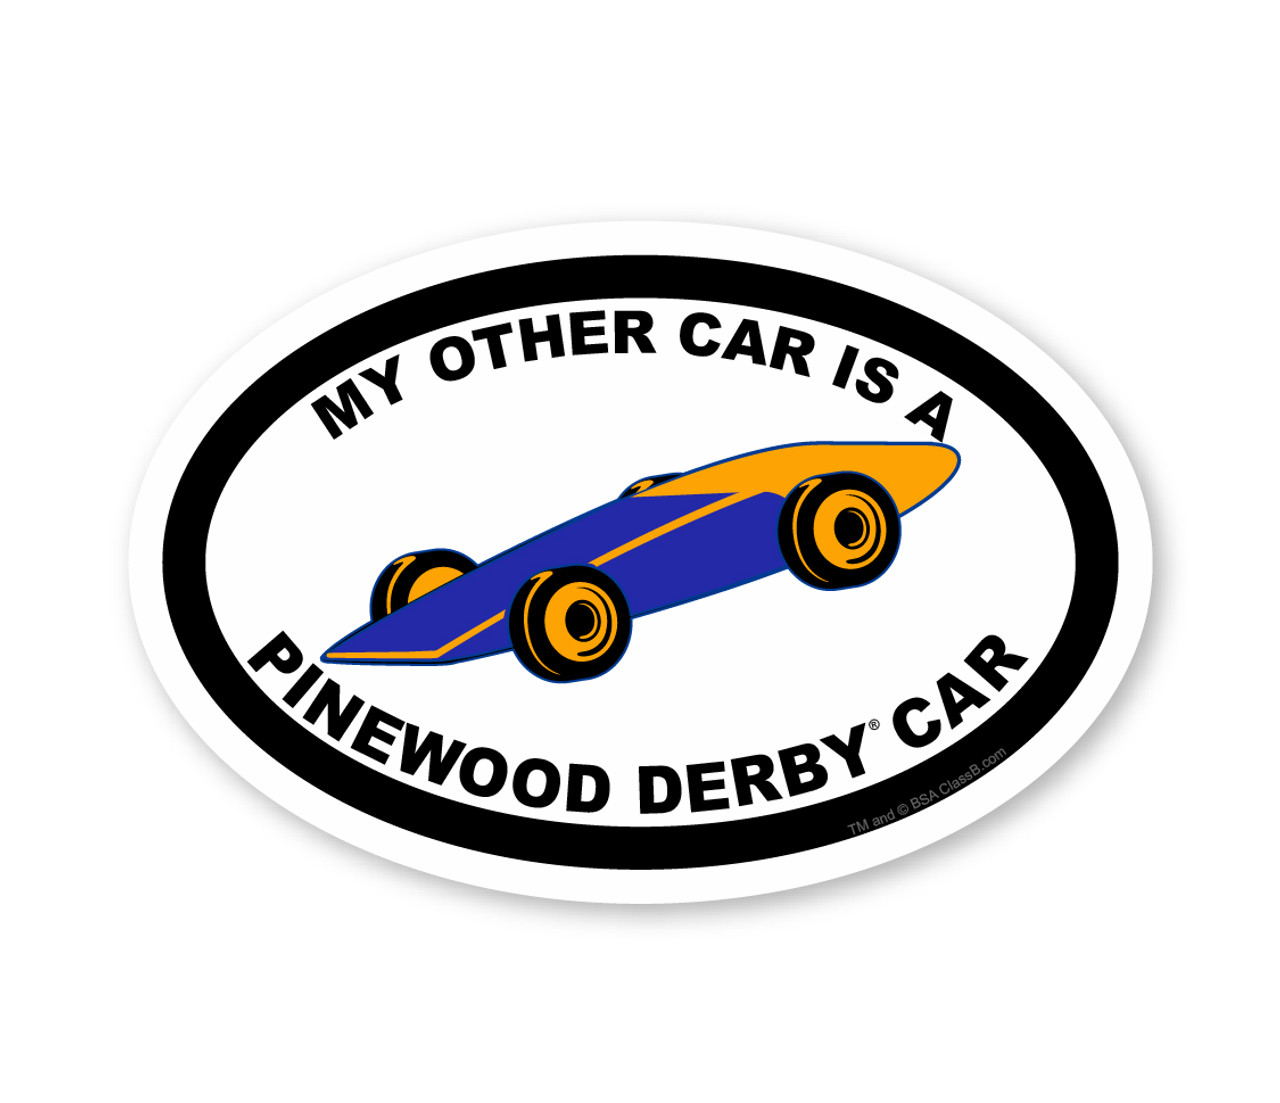 Cub Scout Pack Sticker - 8 pack - Oval Pinewood Derby (SP5427)